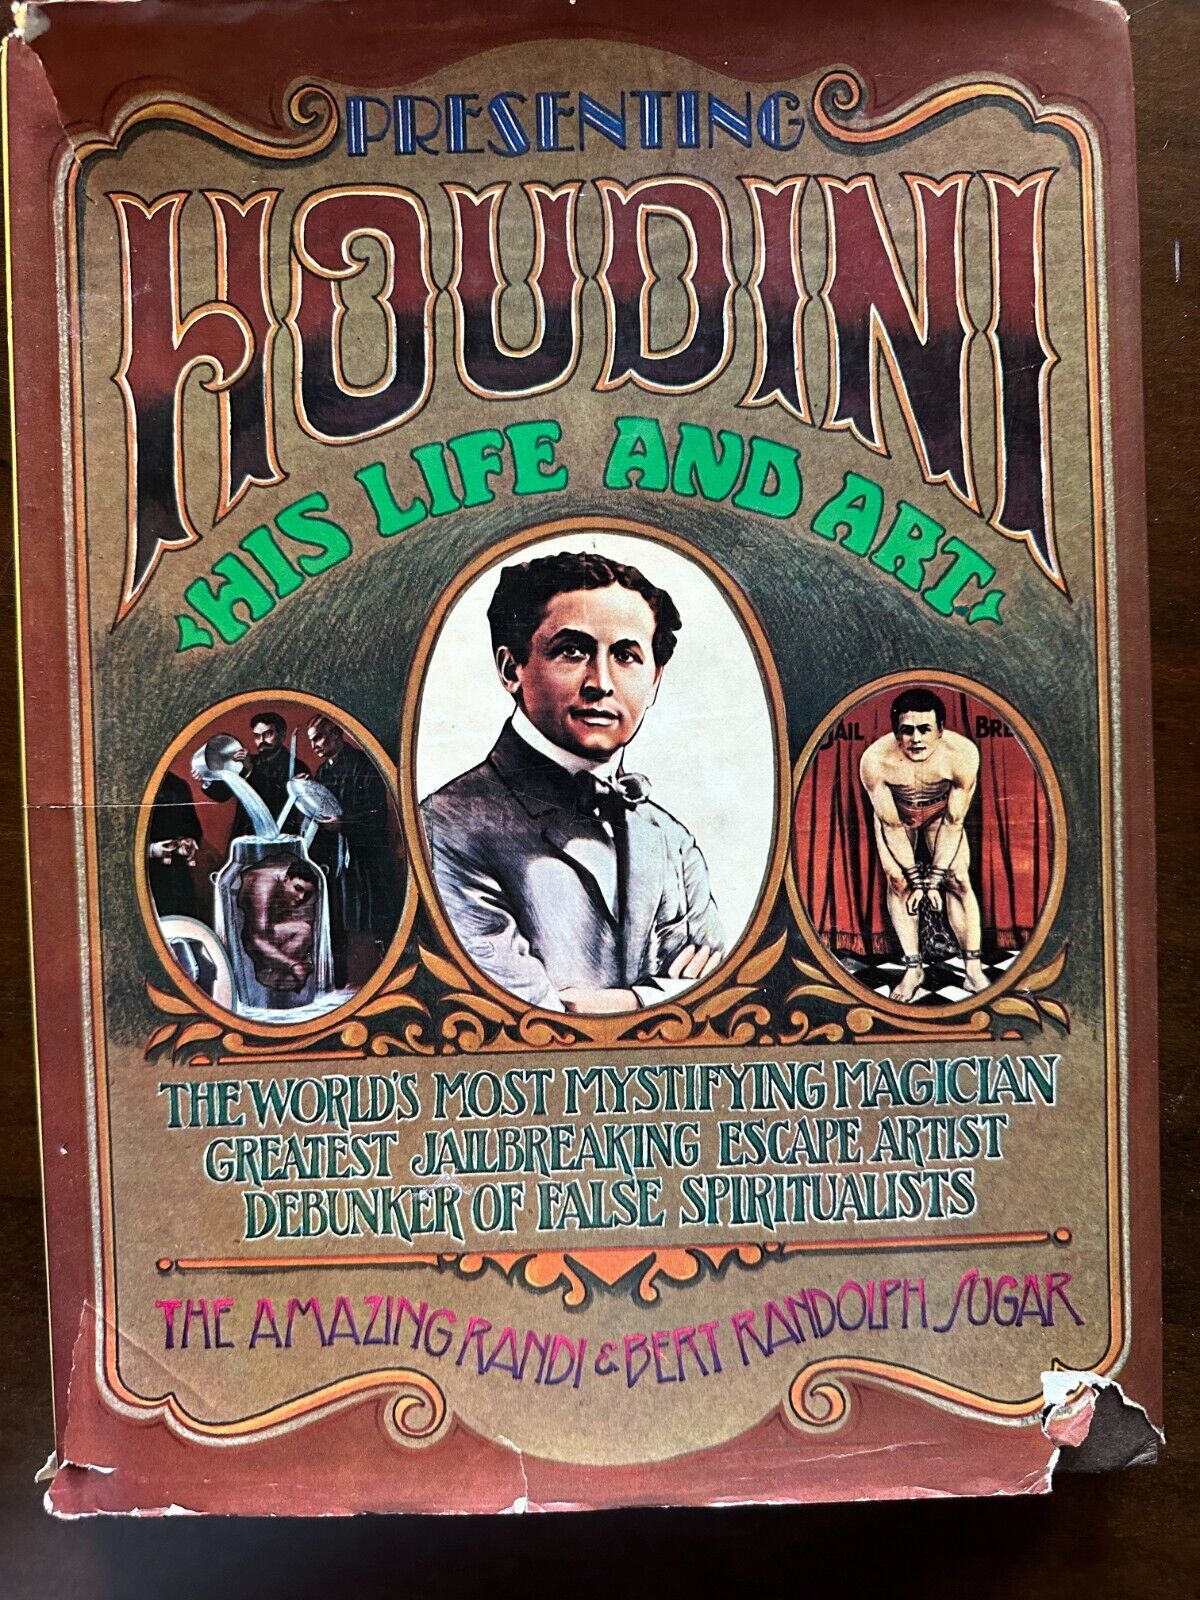 Houdini His Life and Art by Randi and Sugar 1977 from the library Houdini Museum